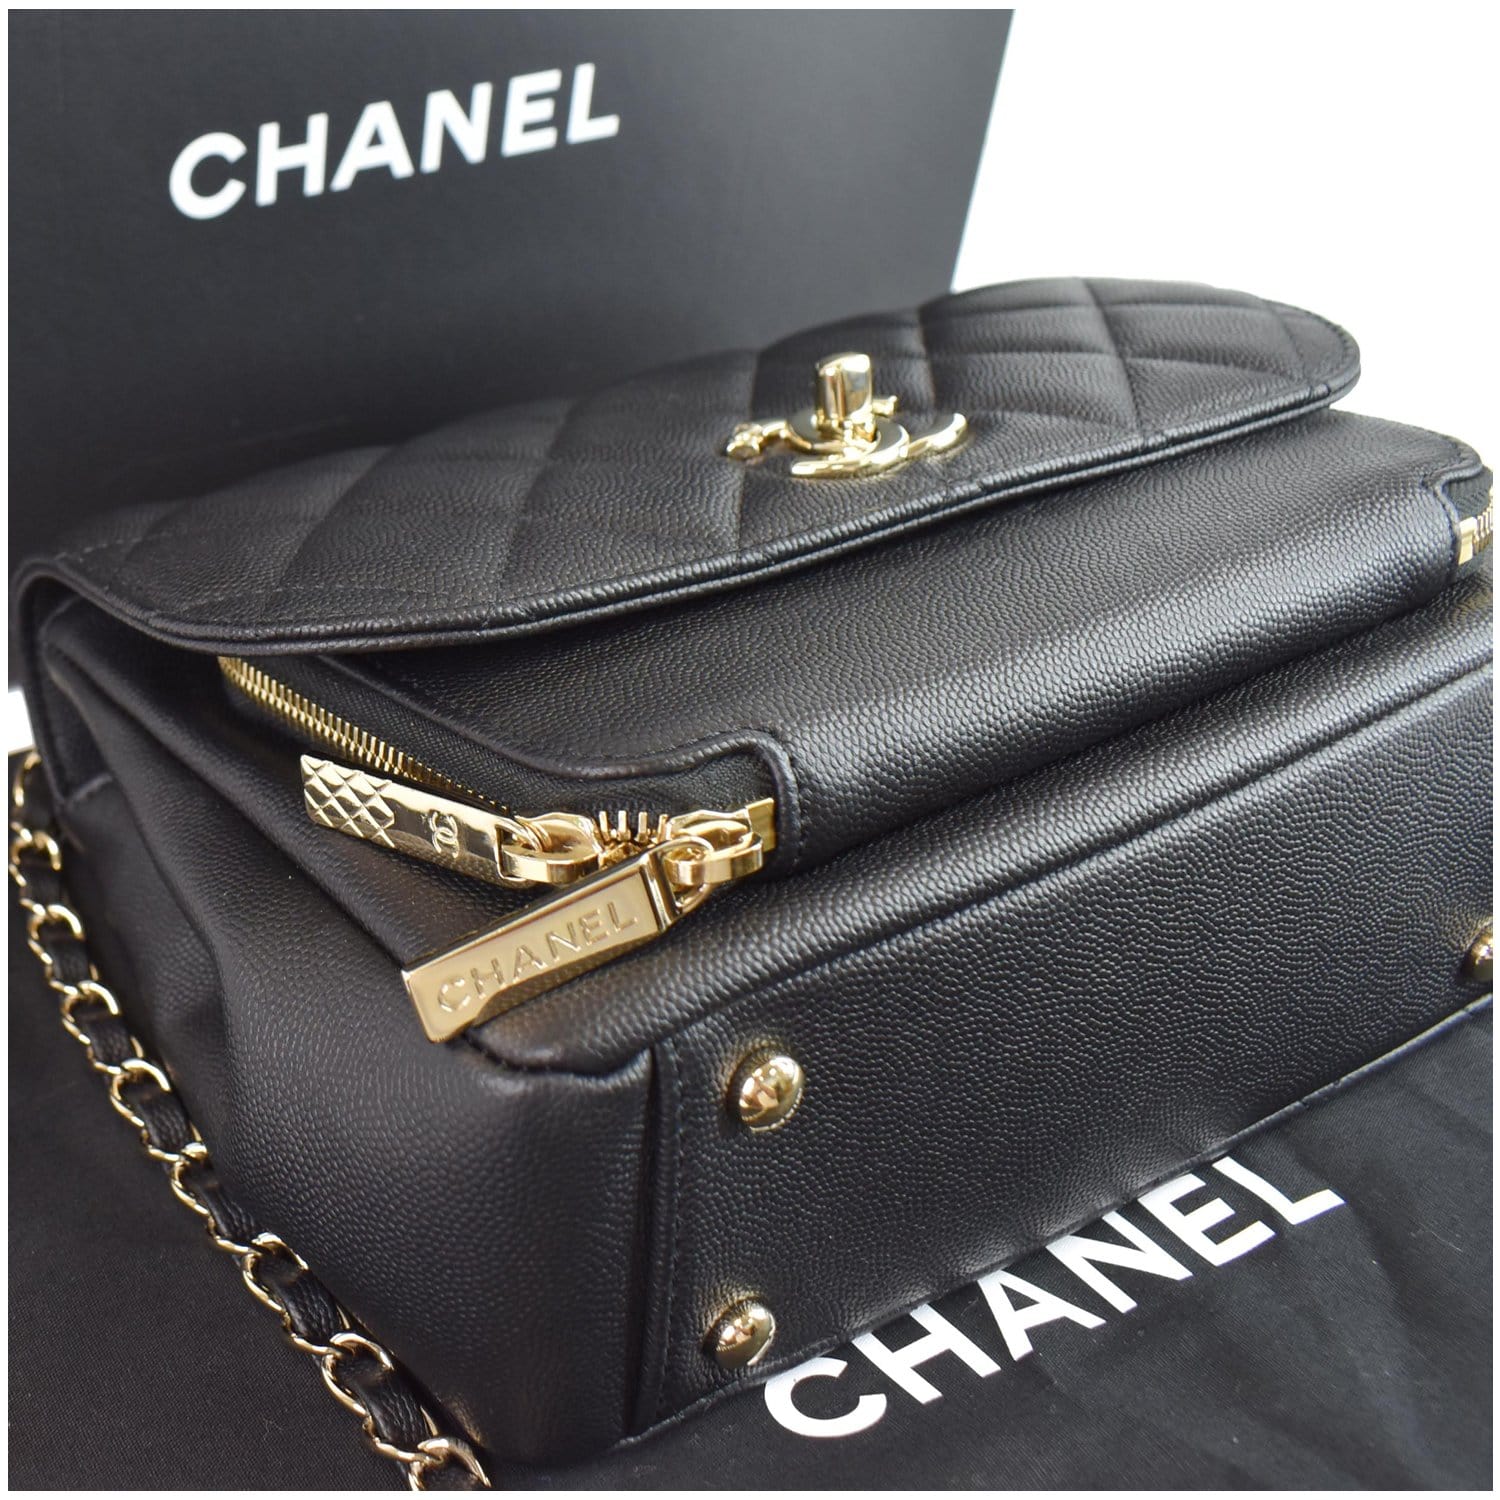 Business affinity leather crossbody bag Chanel Black in Leather - 30408412